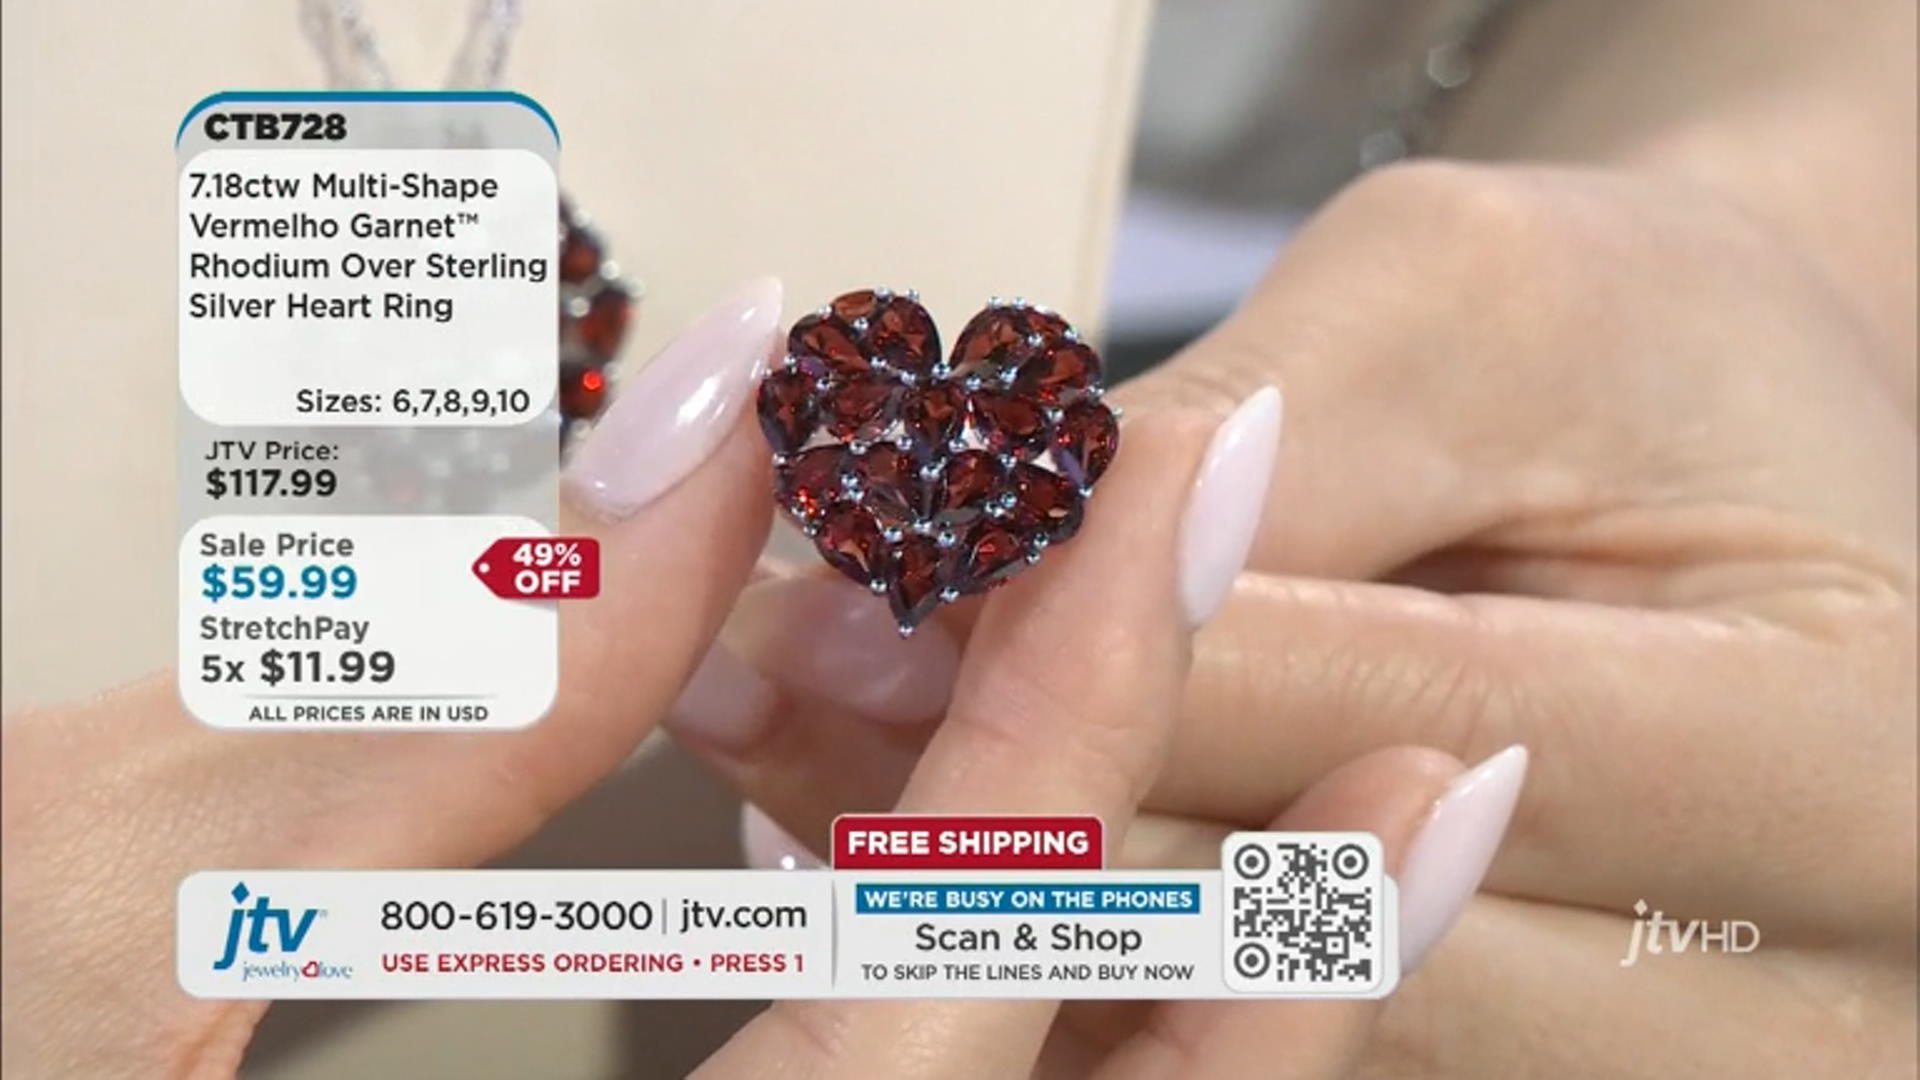 Red Garnet Rhodium Over Sterling Silver Heart Ring 7.18ctw Video Thumbnail